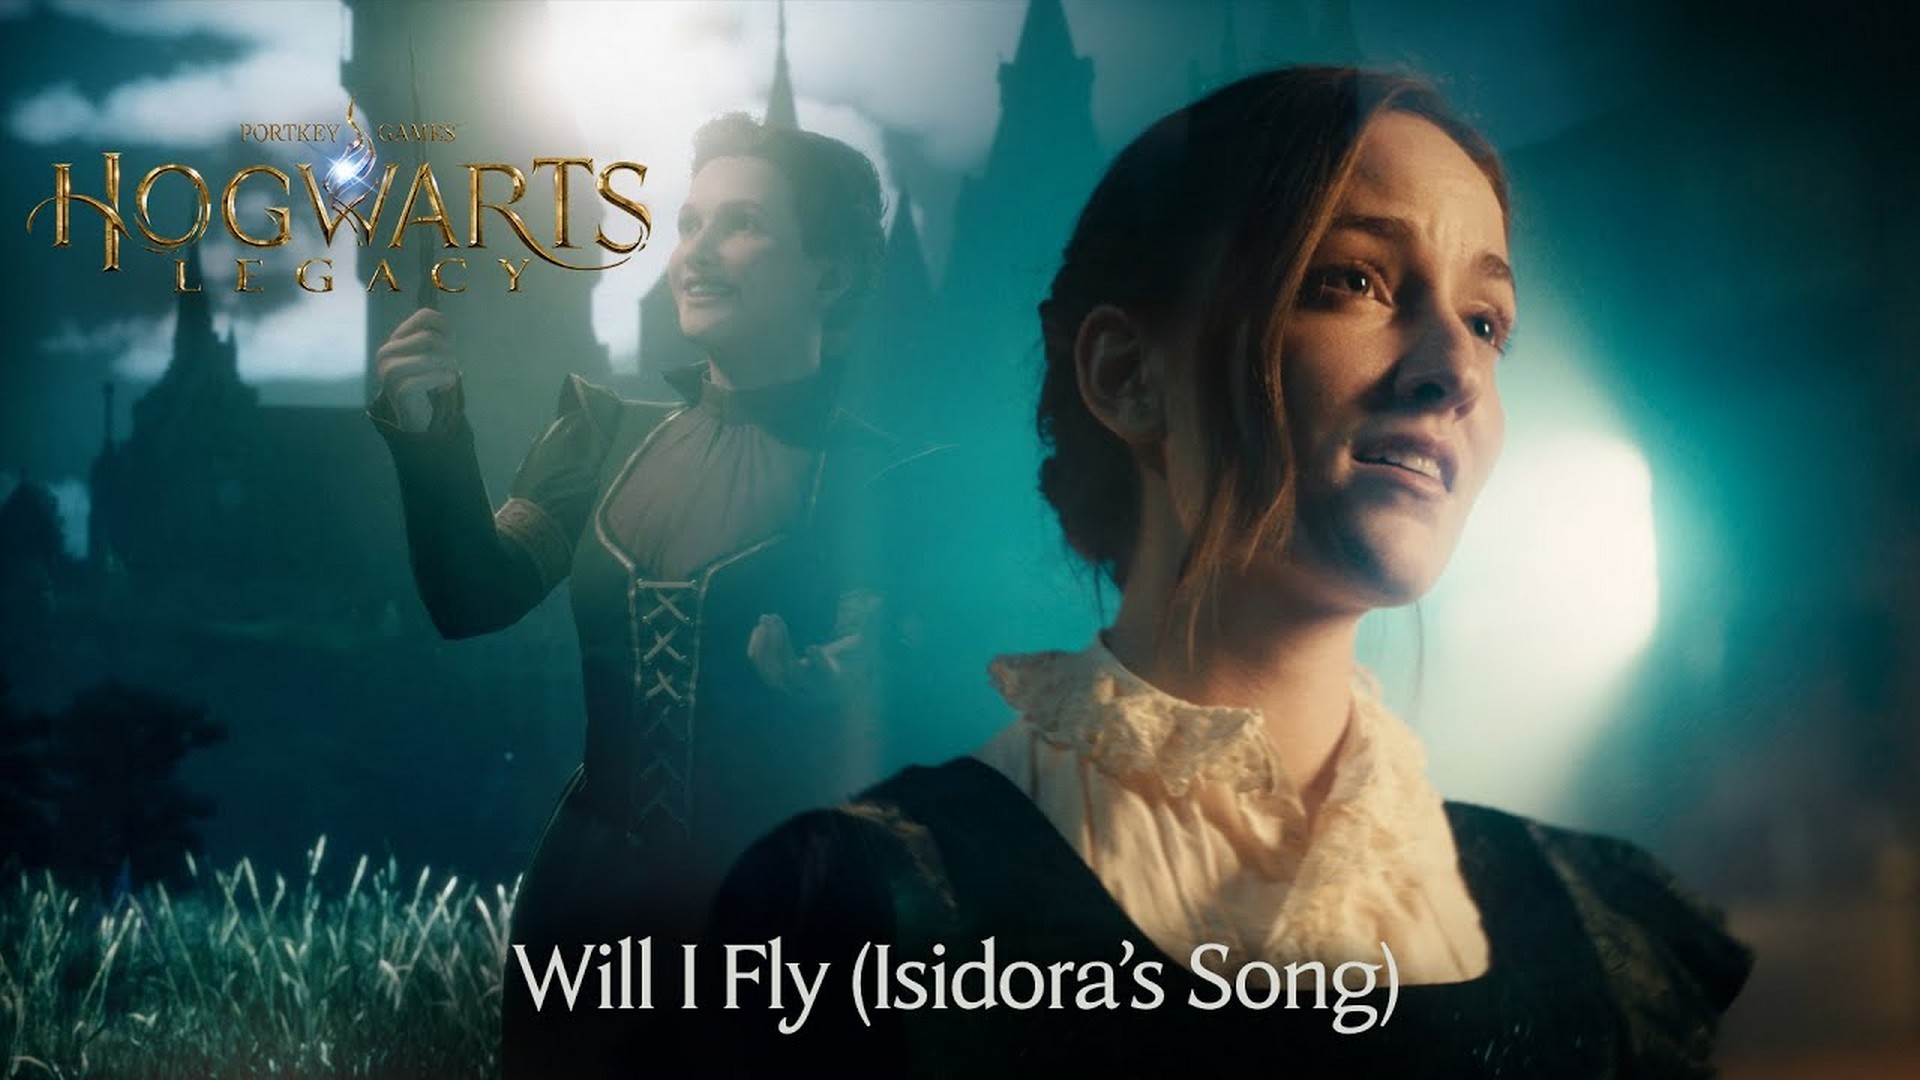 New Hogwarts Legacy Vocal Music Video For “Will I Fly (Isidora’s Song)” Features Dune Moss